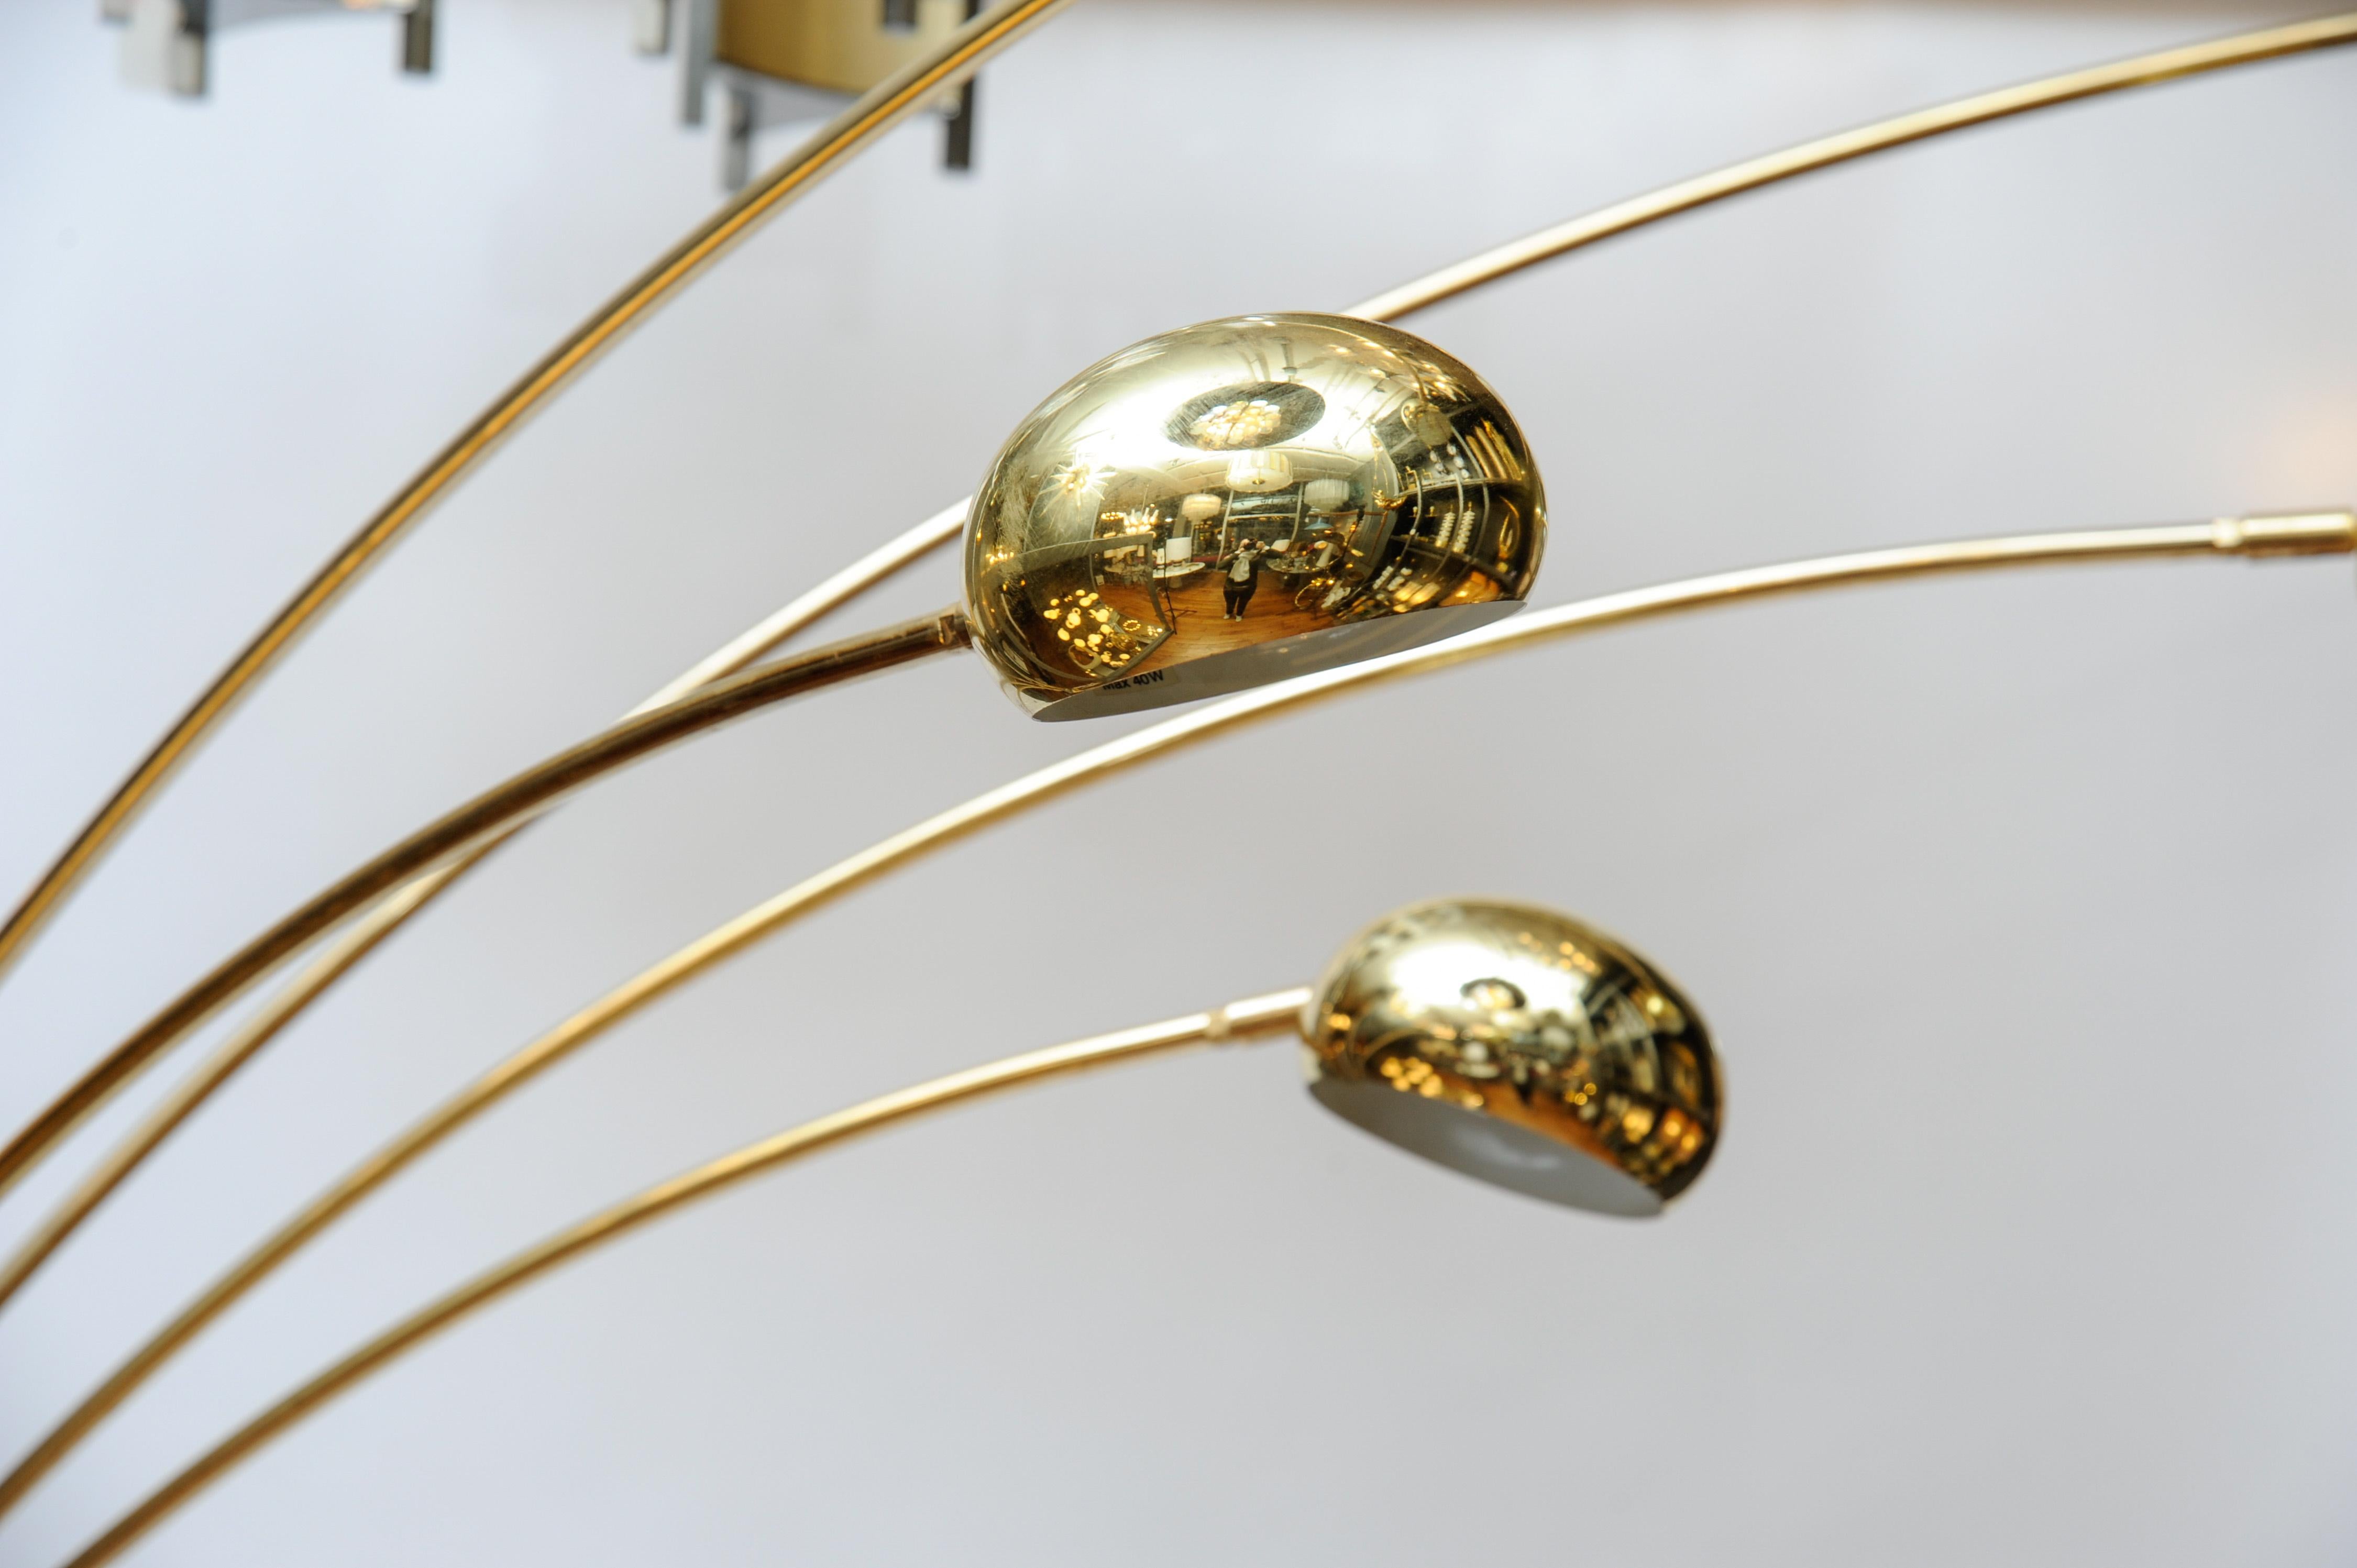 Arc floor lamp from Sweden made of a round marble foot, brass central stem and five arms of light.